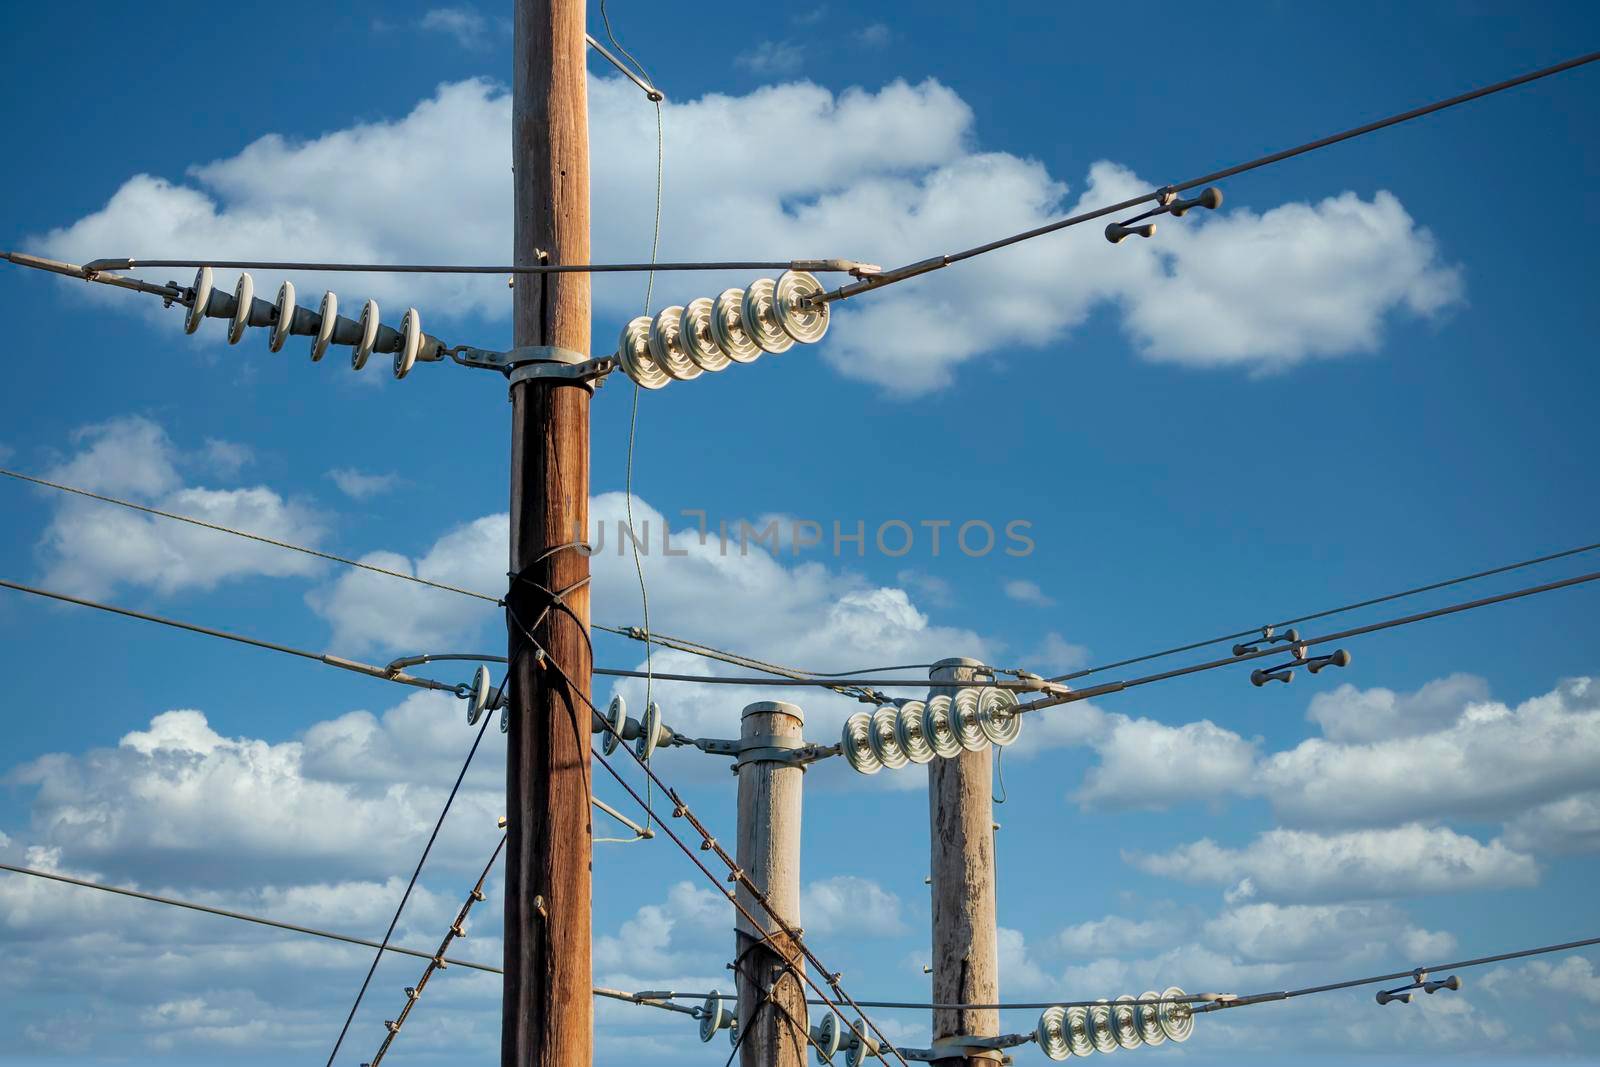 Photograph of a transmission line cable system connected to an assembly bracket